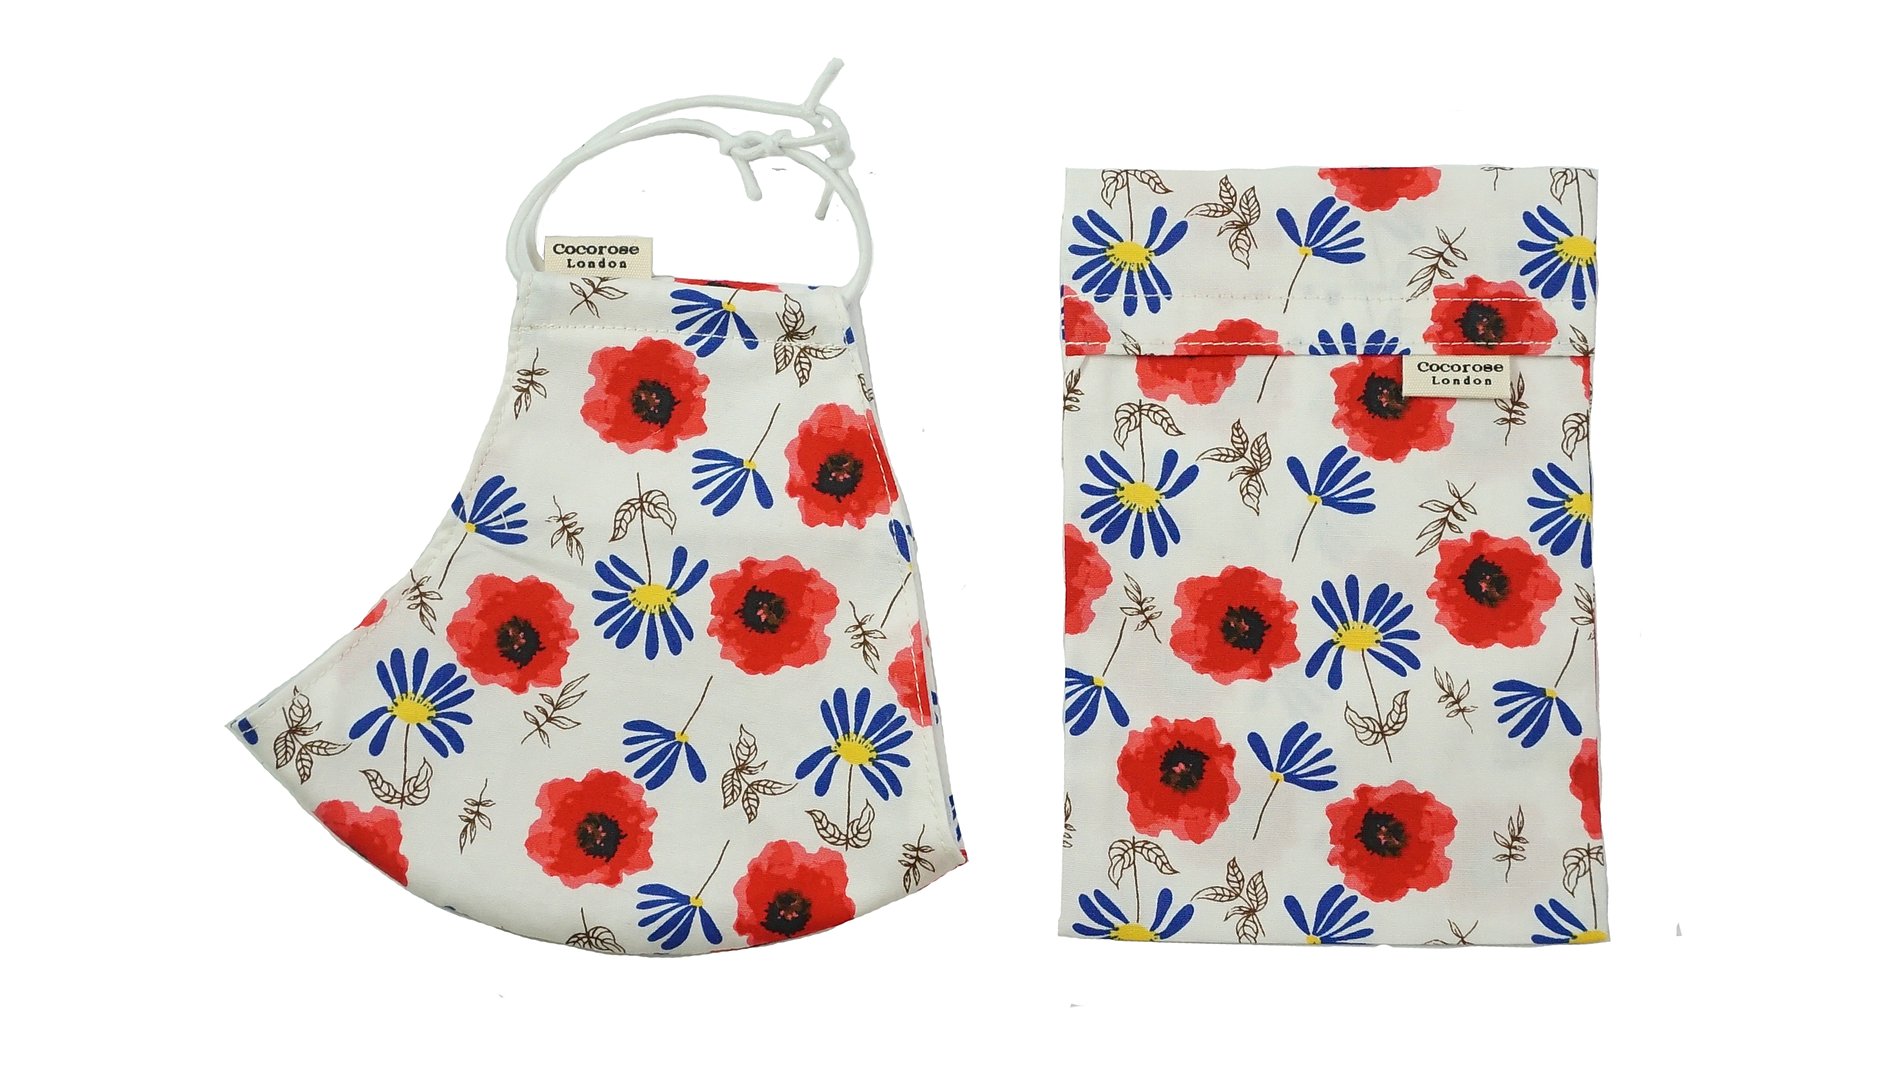 Poppies & blue daisies cotton face mask from Cocorose London